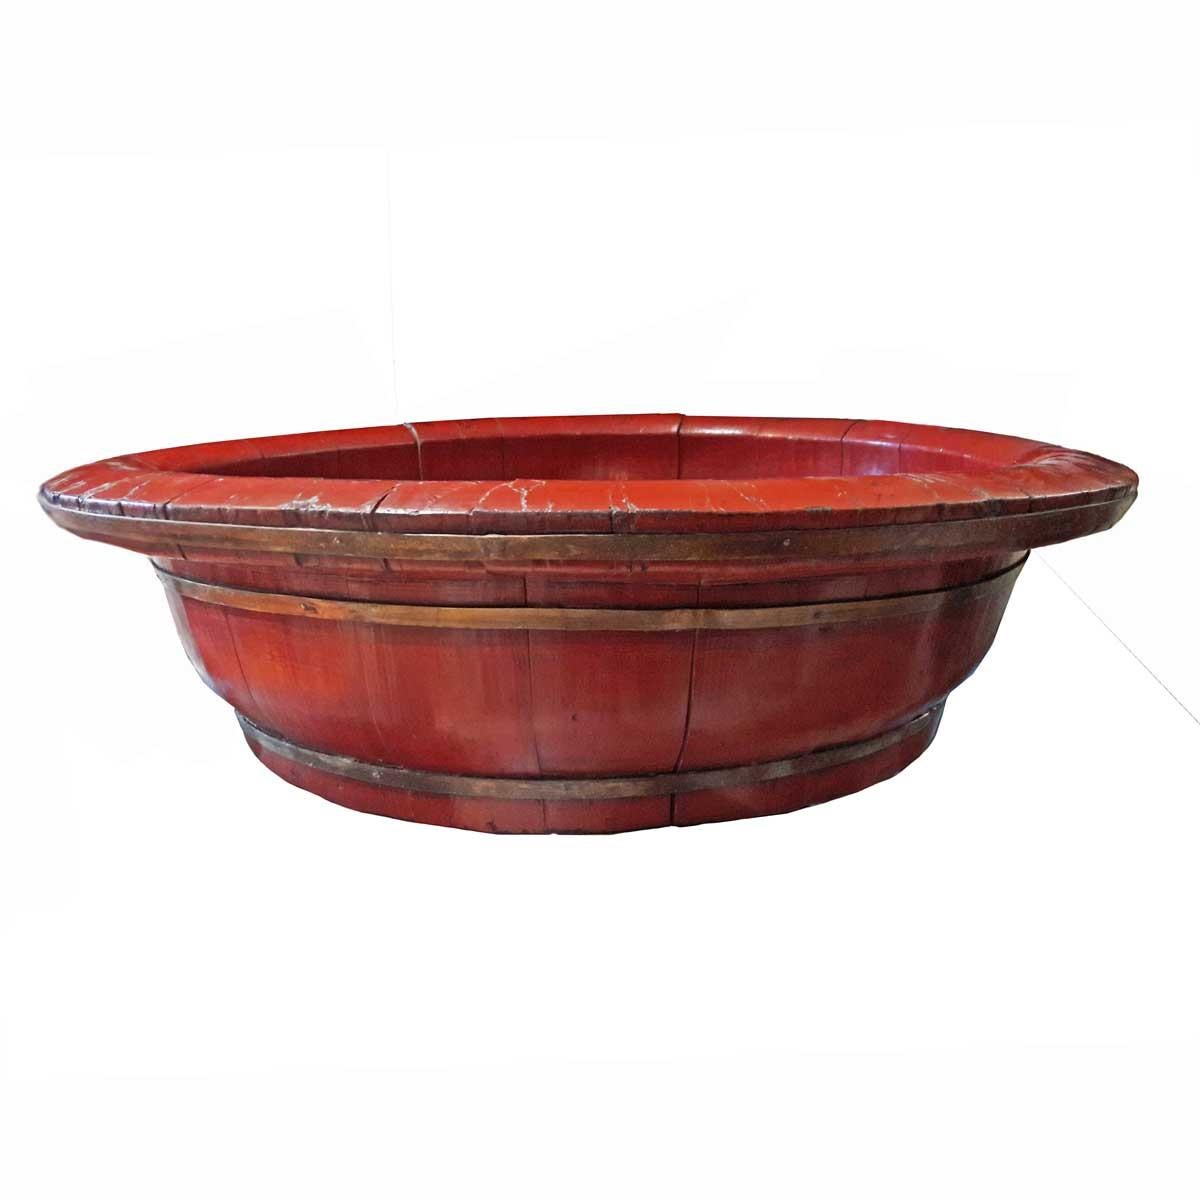 A large Chinese basin or bowl crafted out of peachwood, with red lacquer and forged bronze braces, circa 1880.